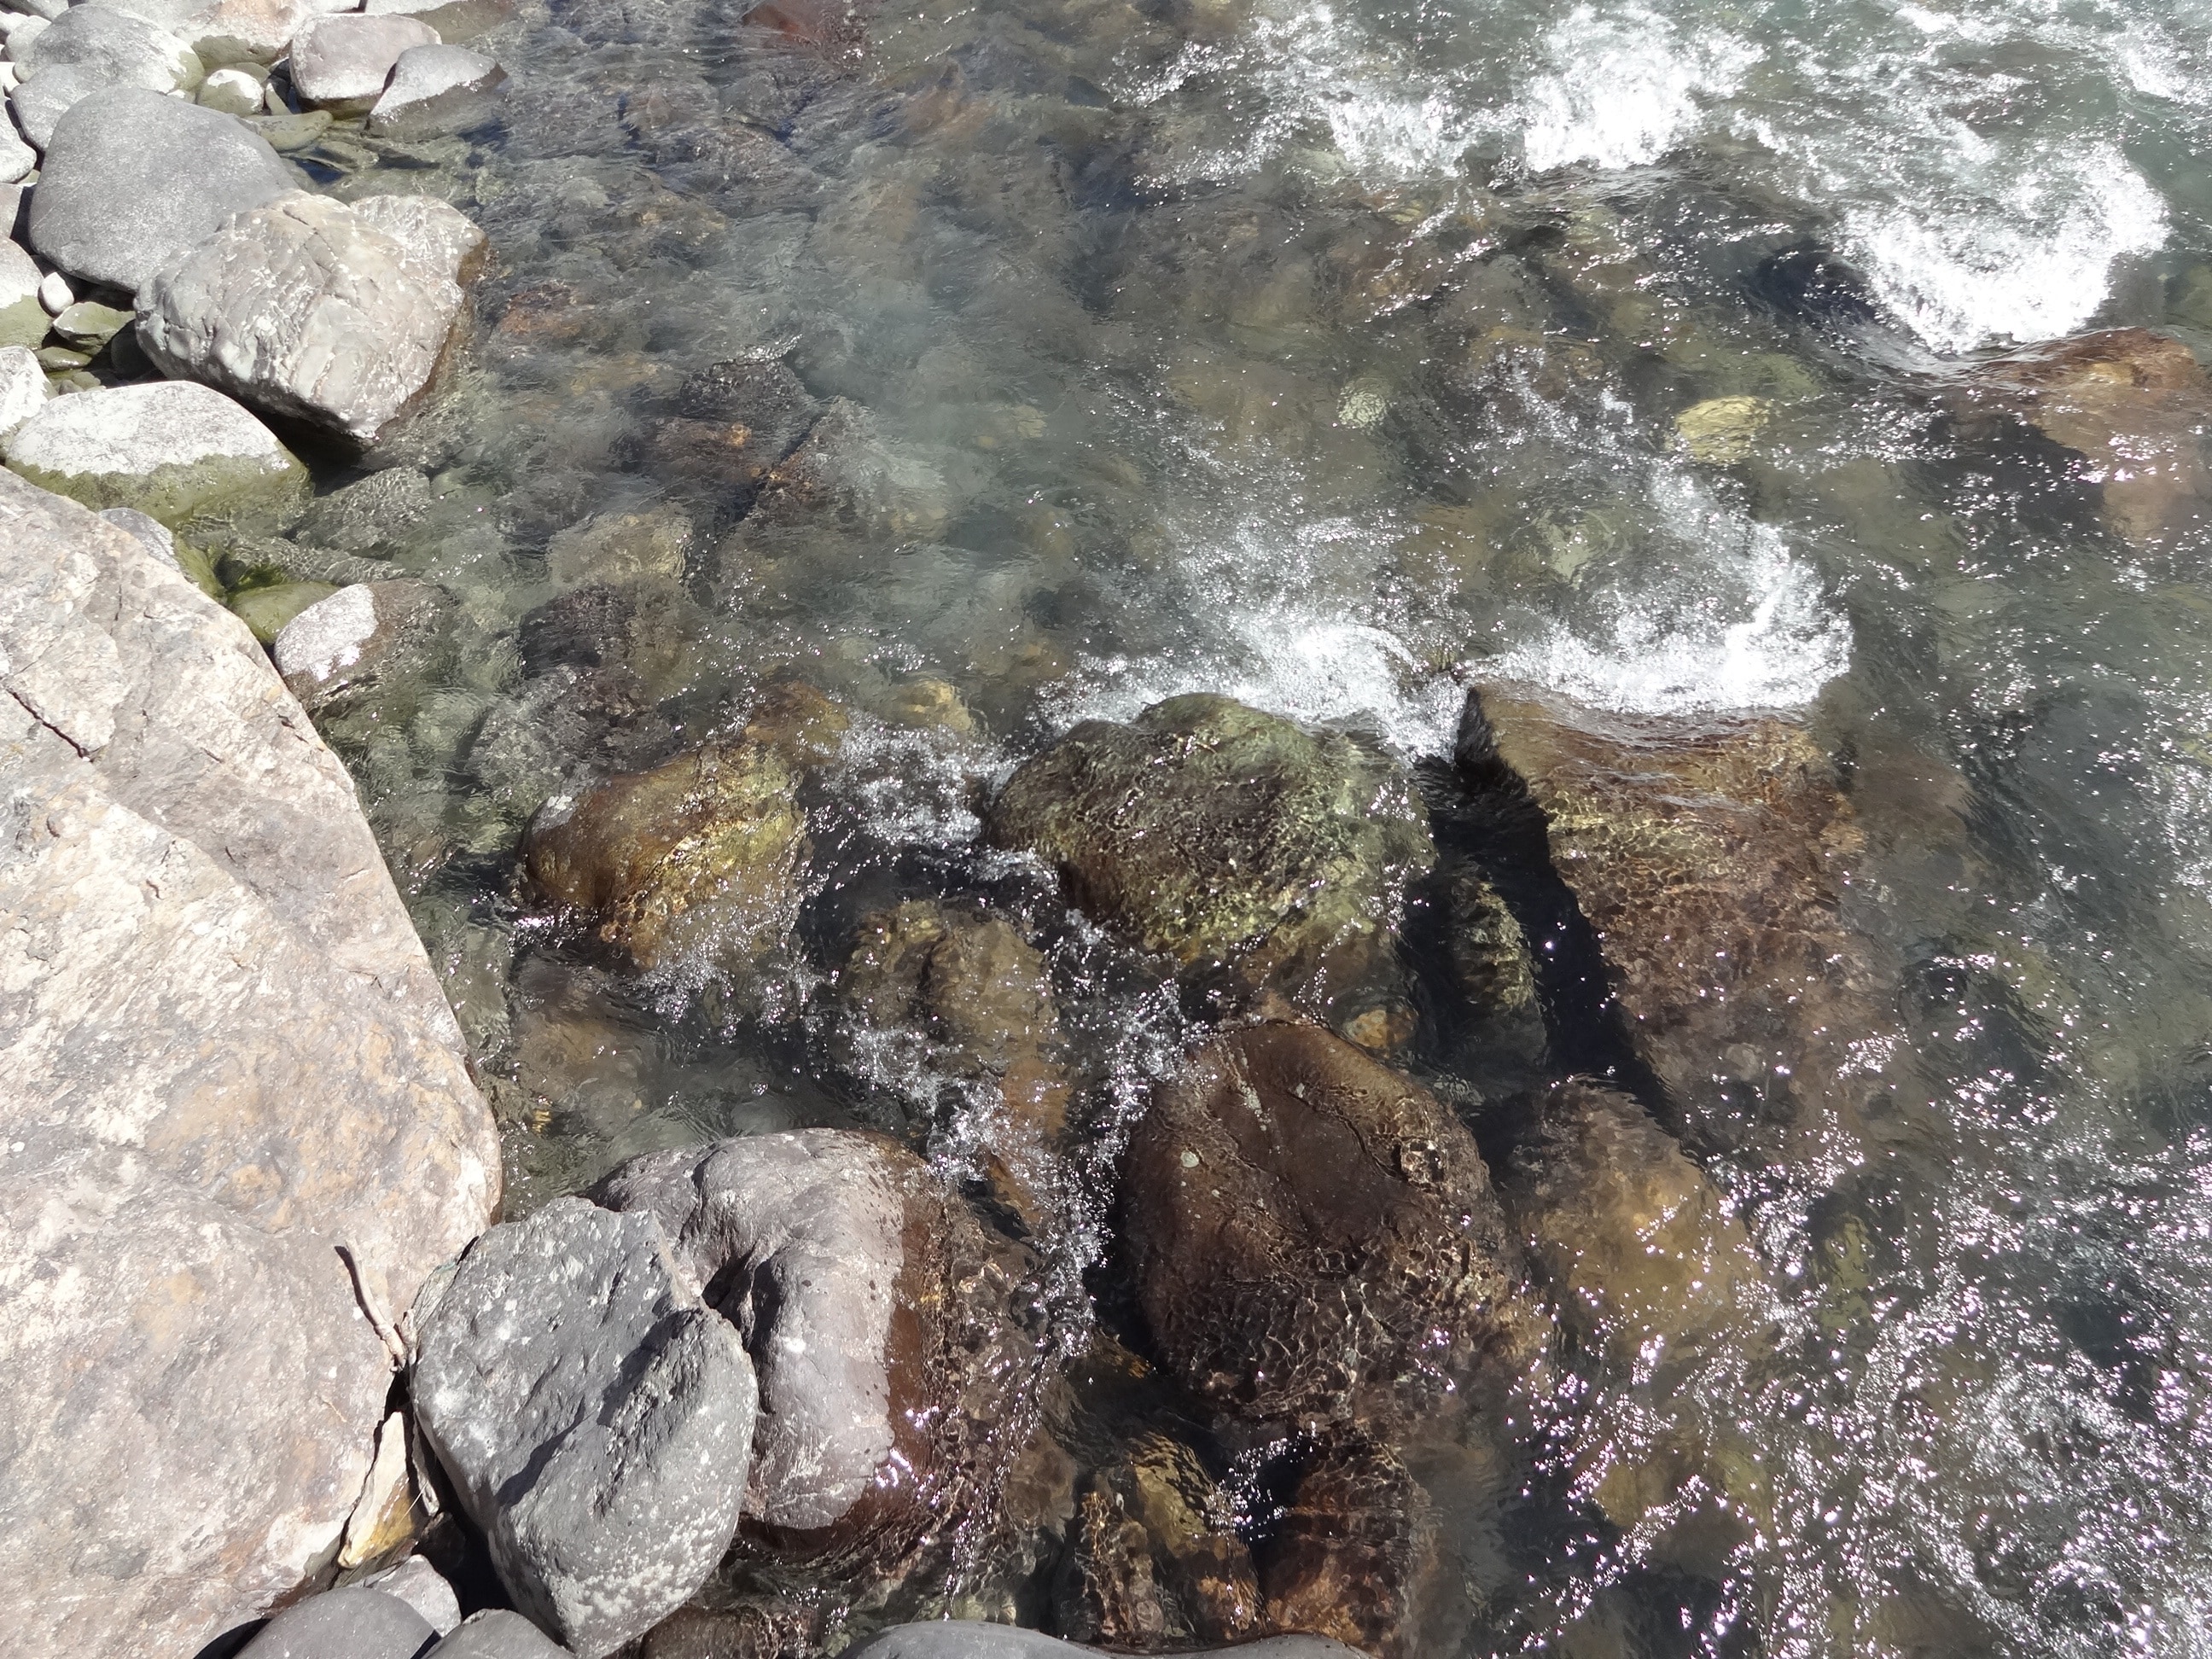 close photo of rocks in body of water